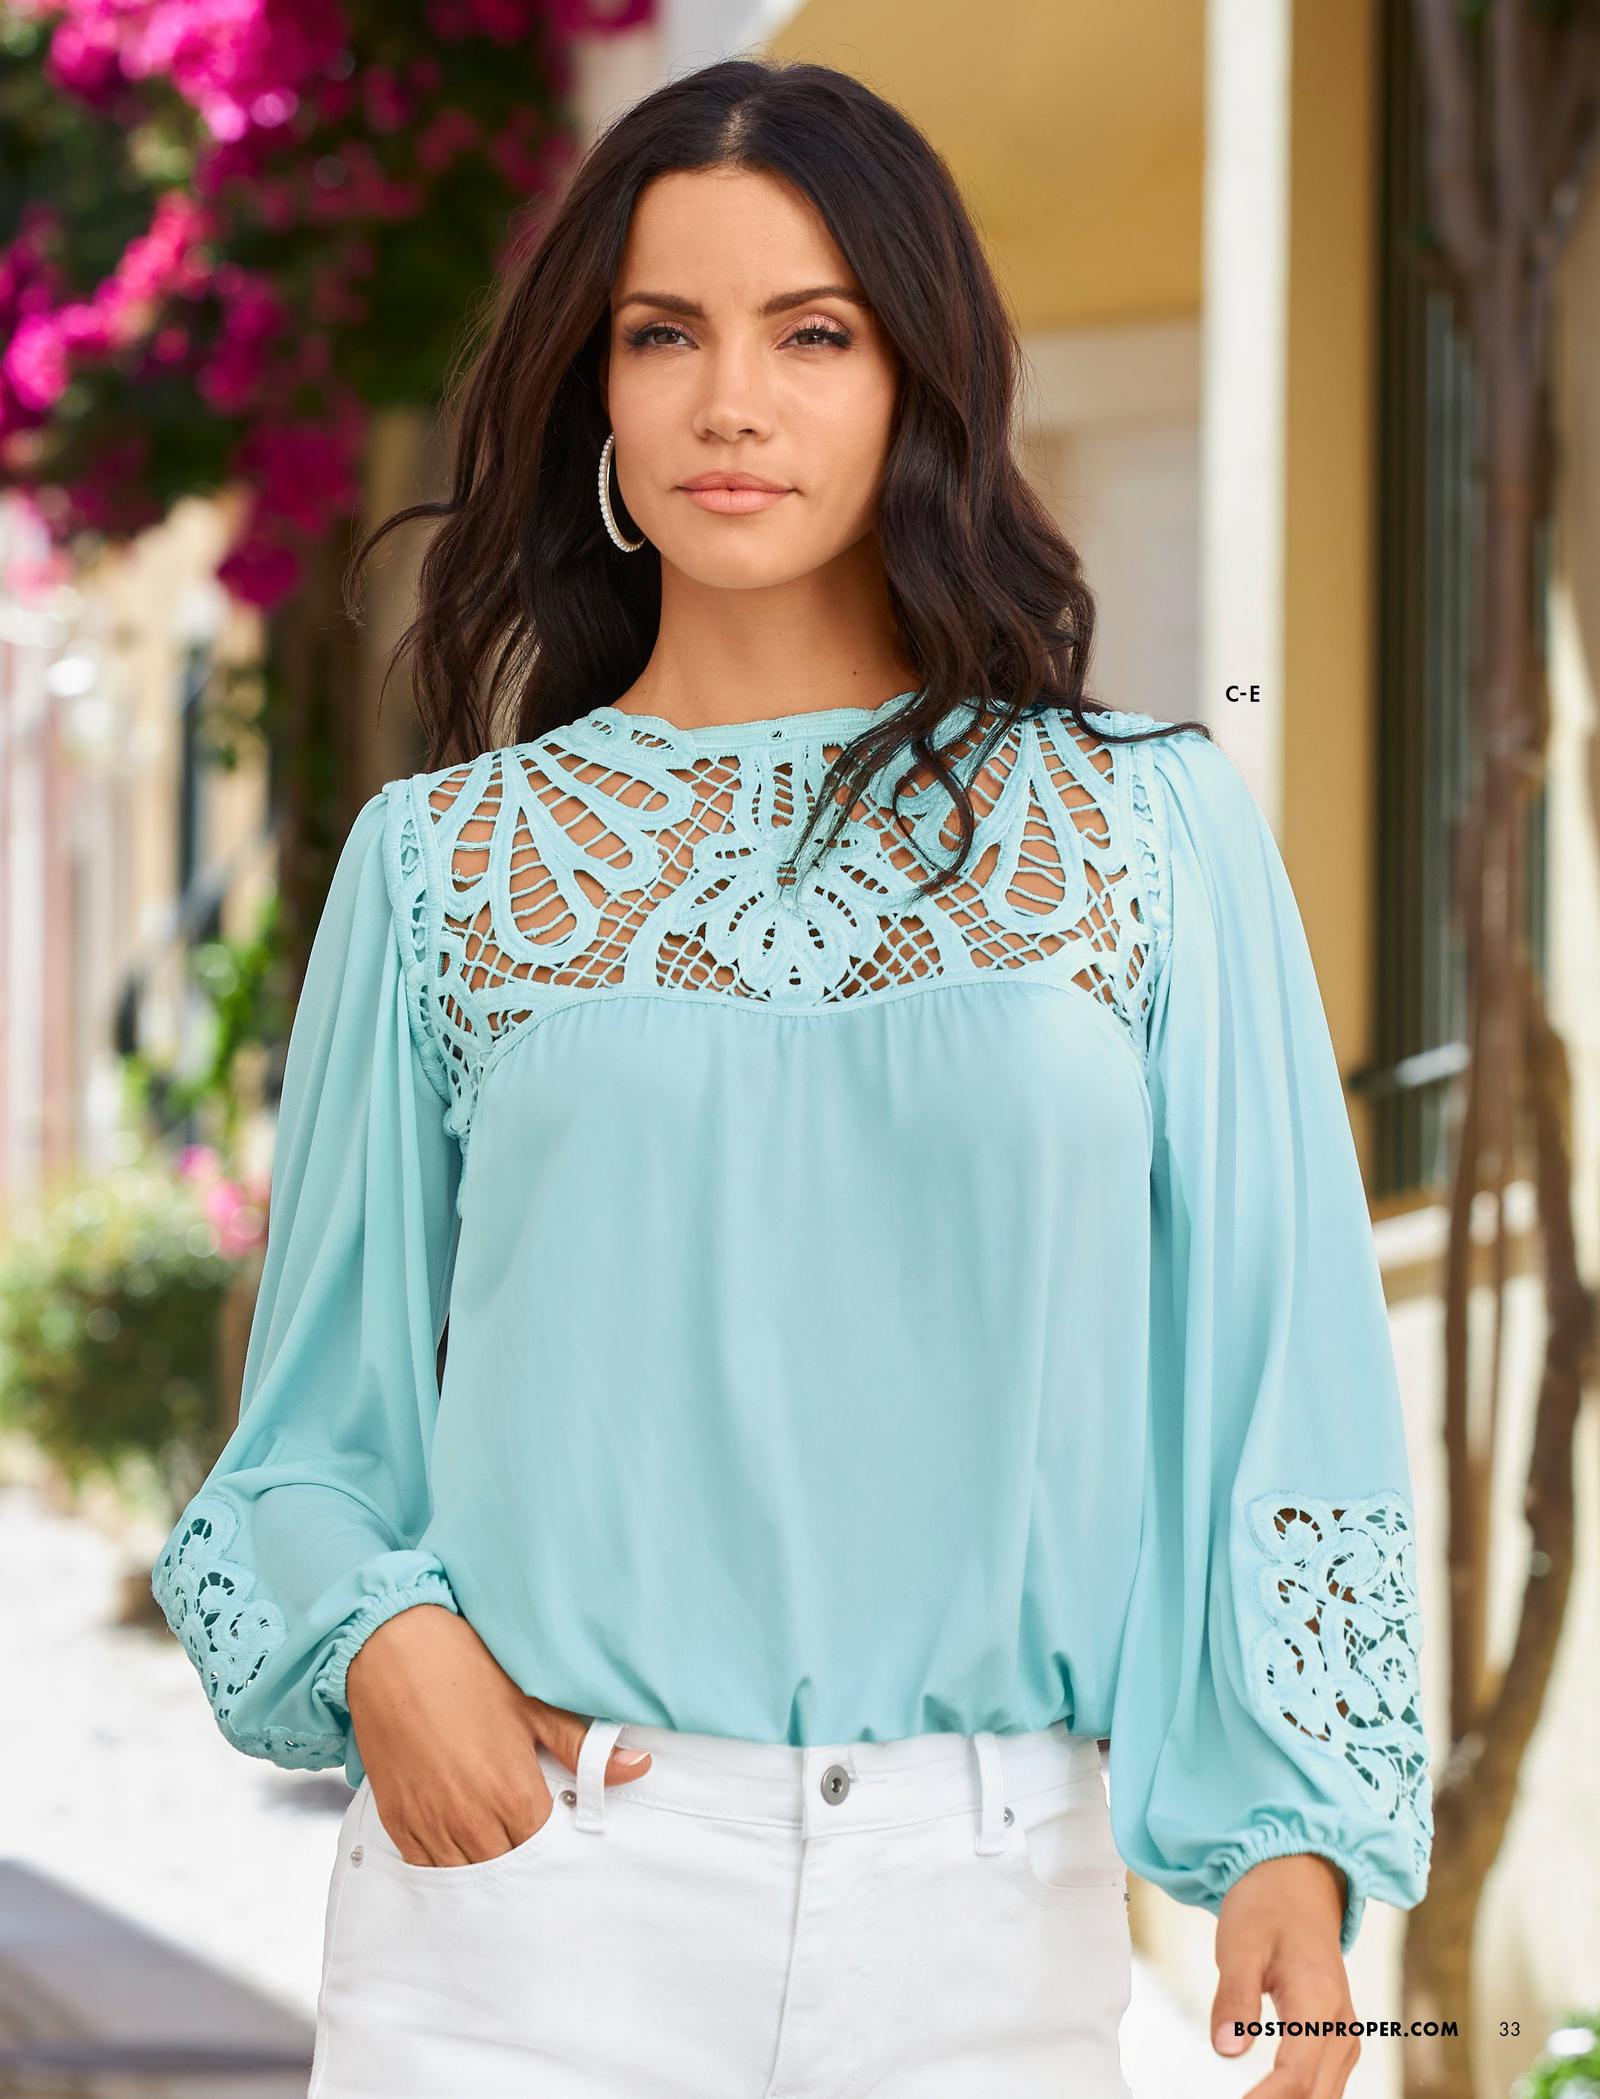 model wearing a light blue lace balloon sleeve blouson top and white jeans.